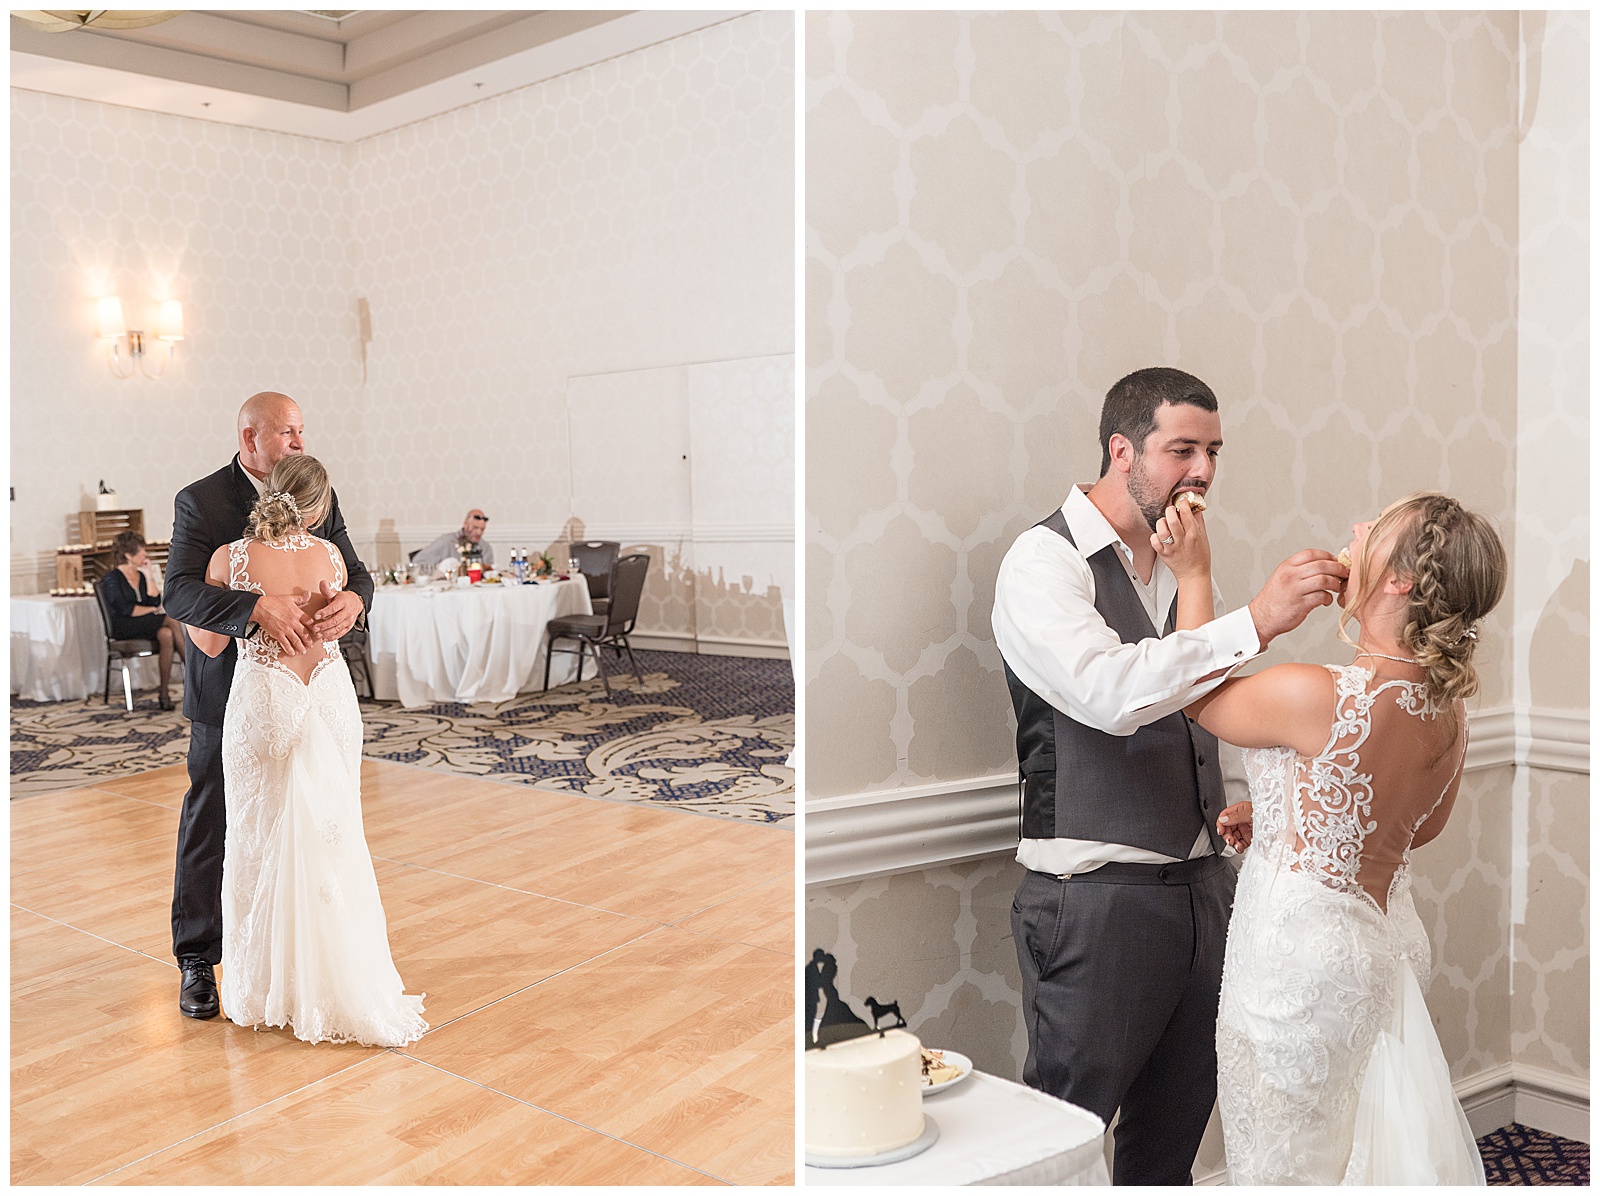 bride and groom celebrate with dancing and cake eating at their reception